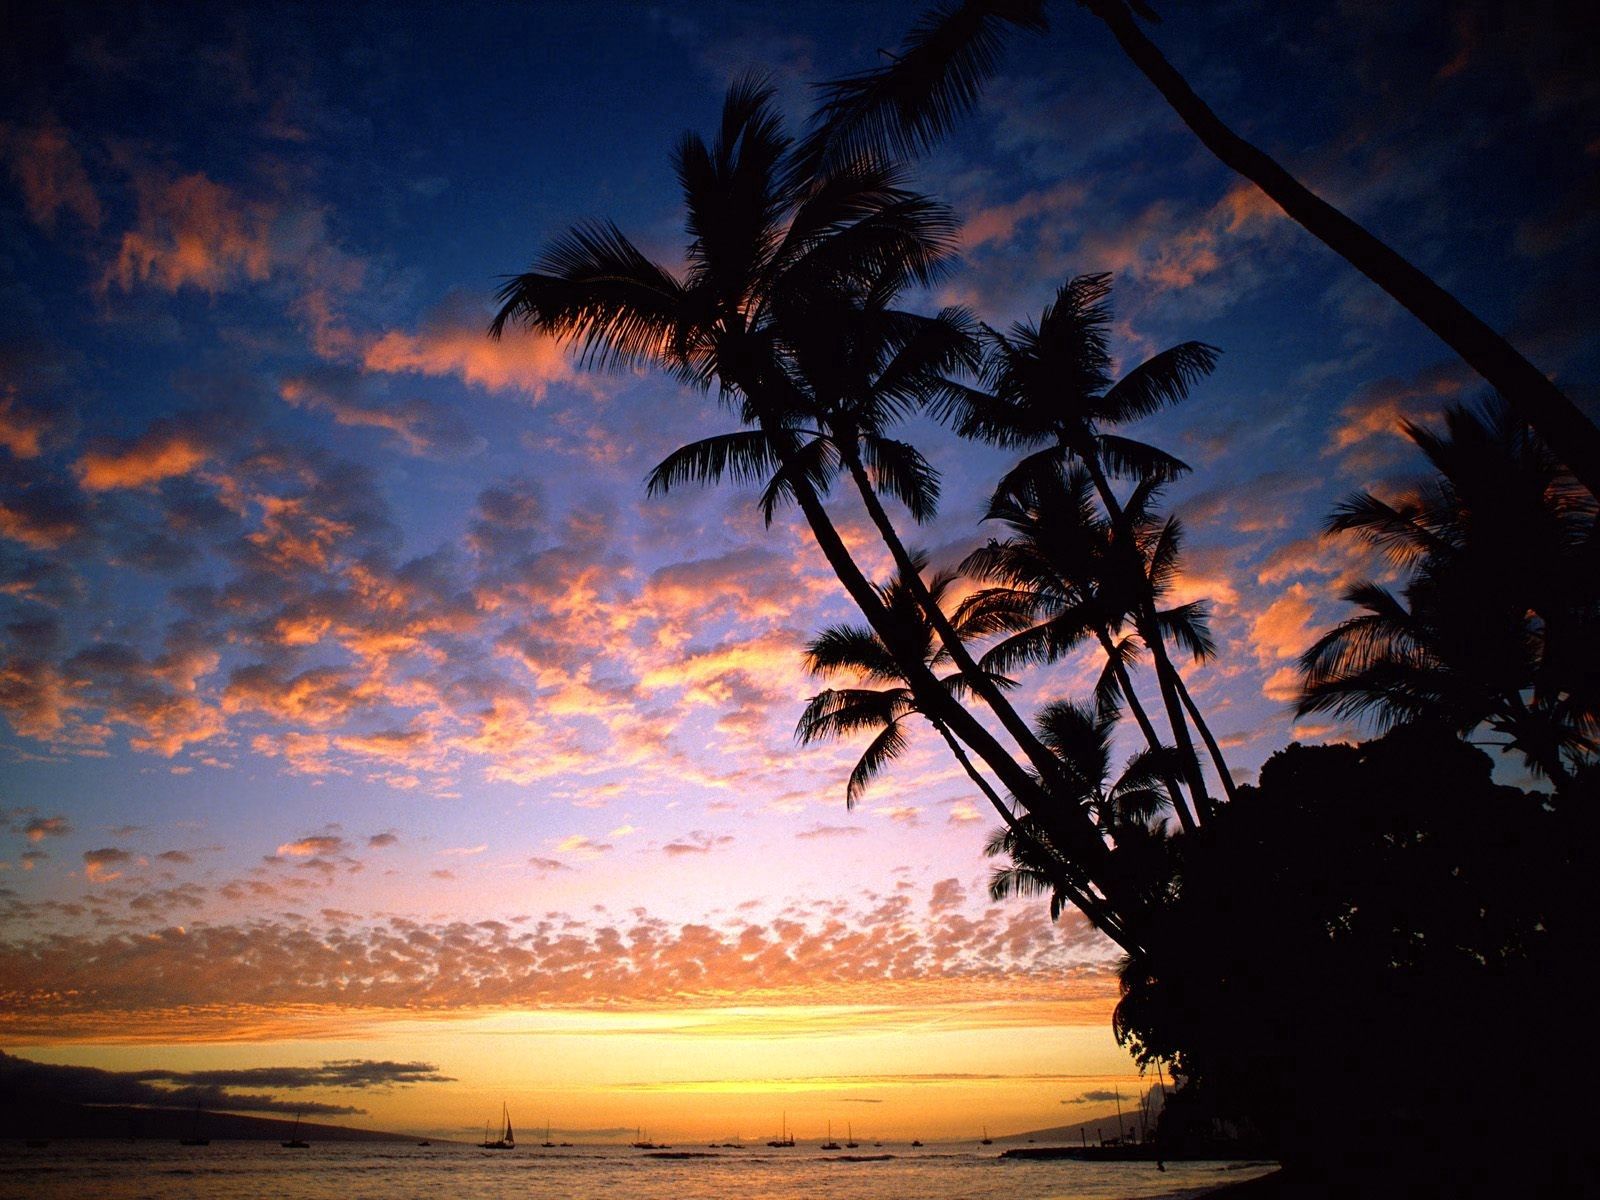 bank, nature, sky, ships, sea, palms, shore, silhouettes, outlines, evening, hawaii cellphone